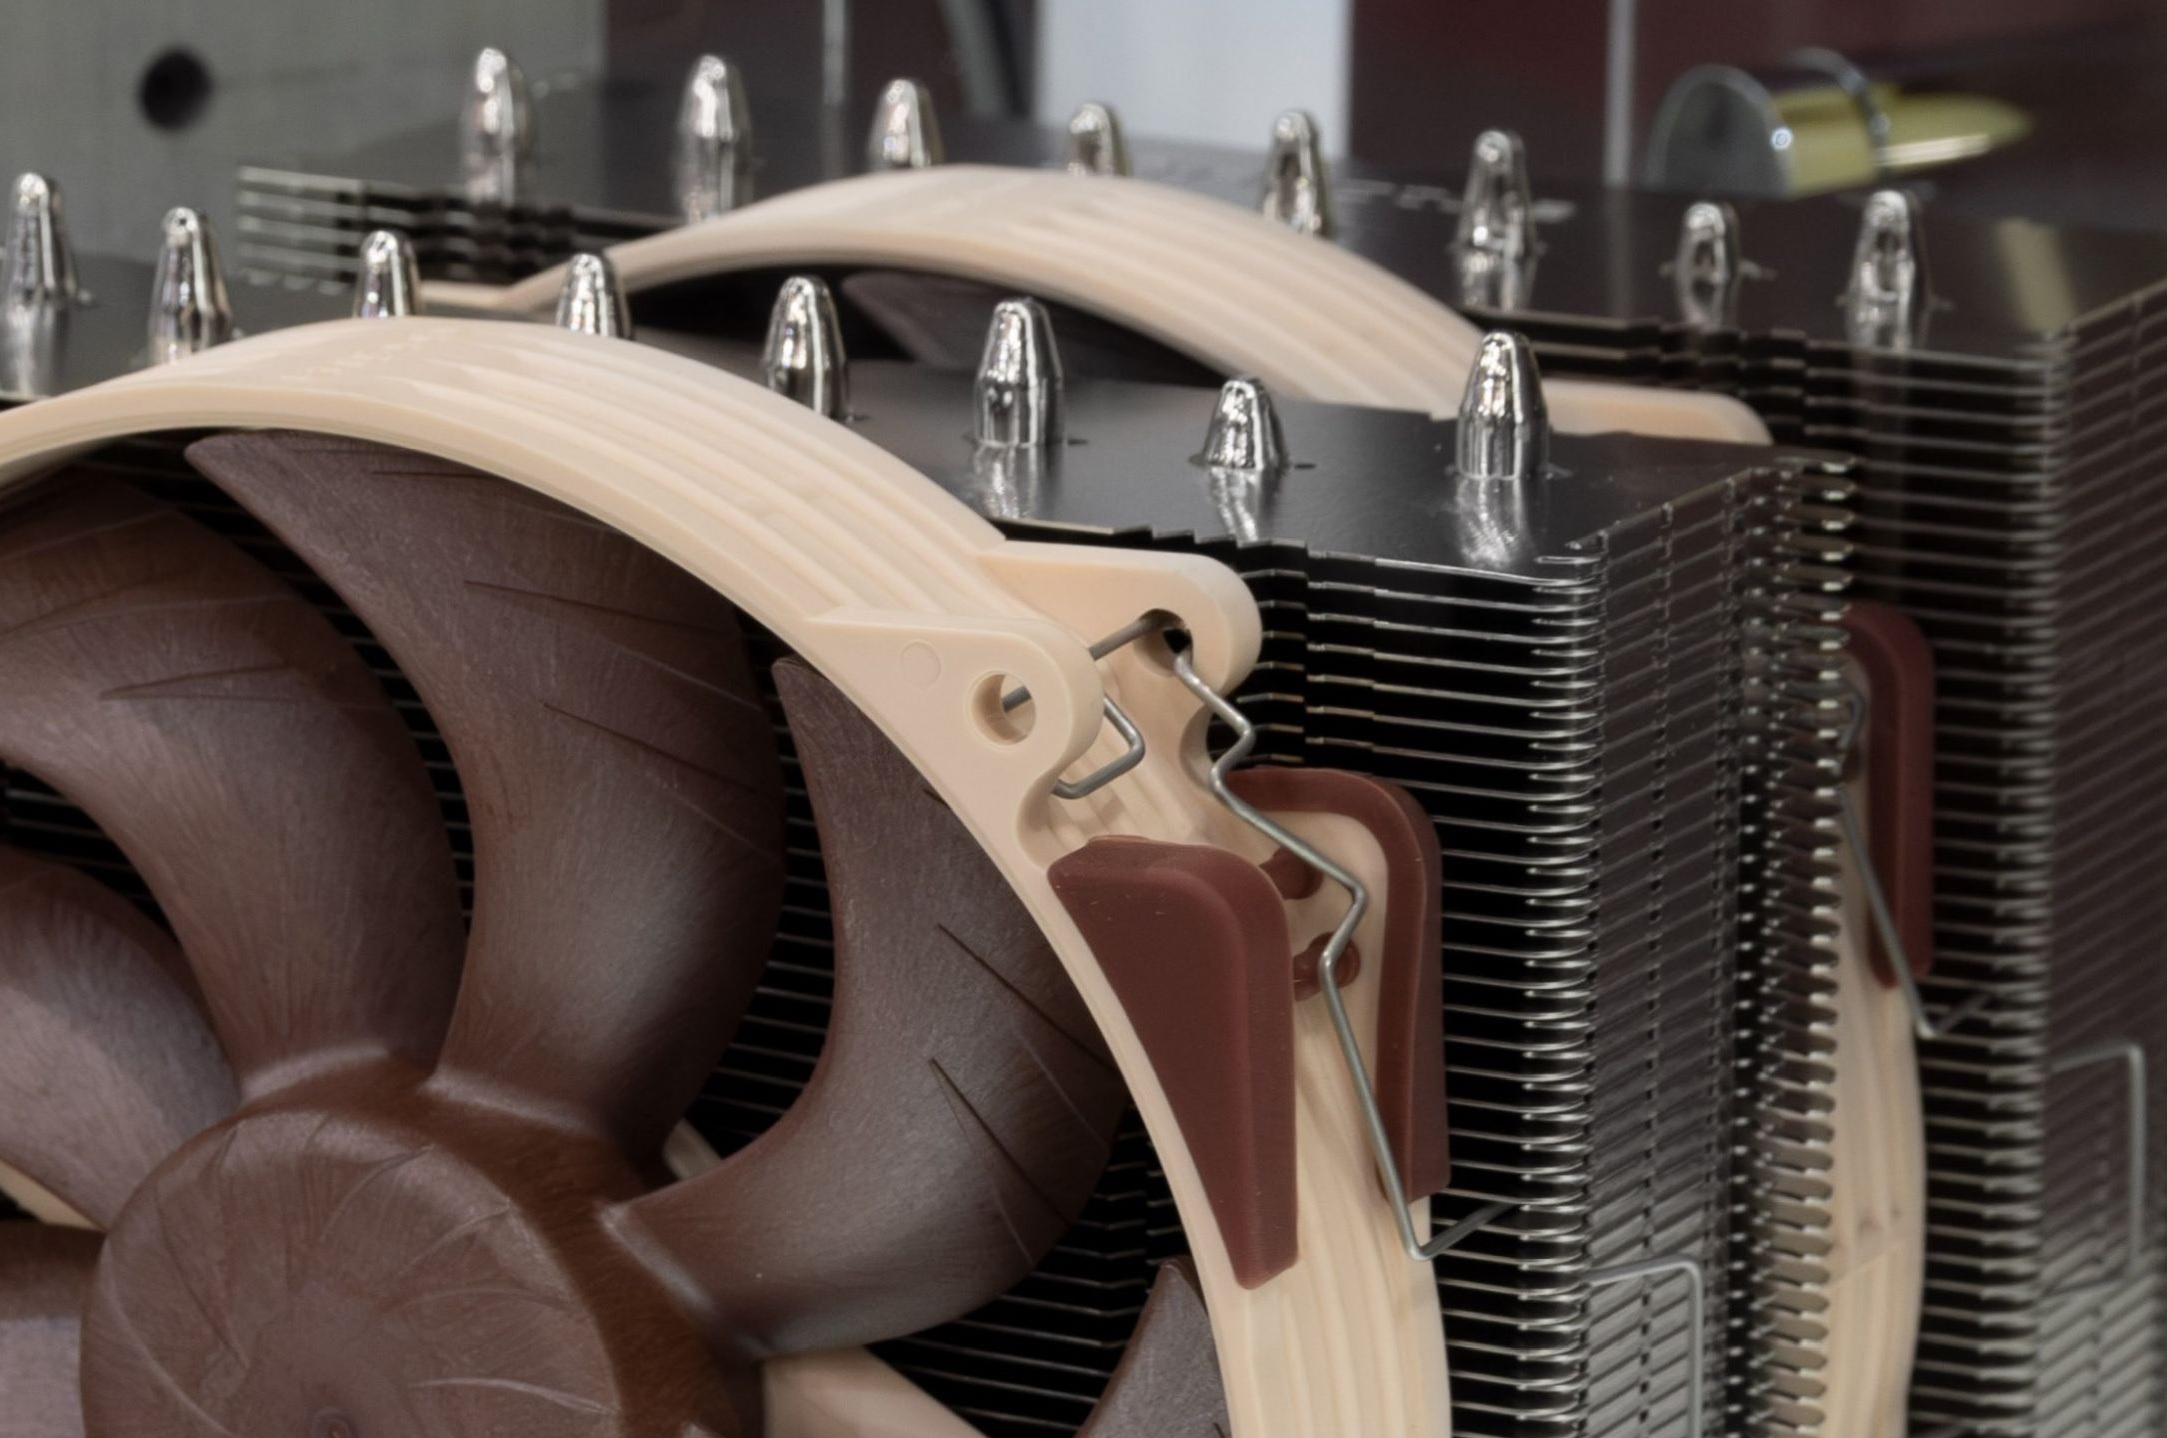 Noctua releases offset mounting for improved cooling performance on AMD AM5  processors